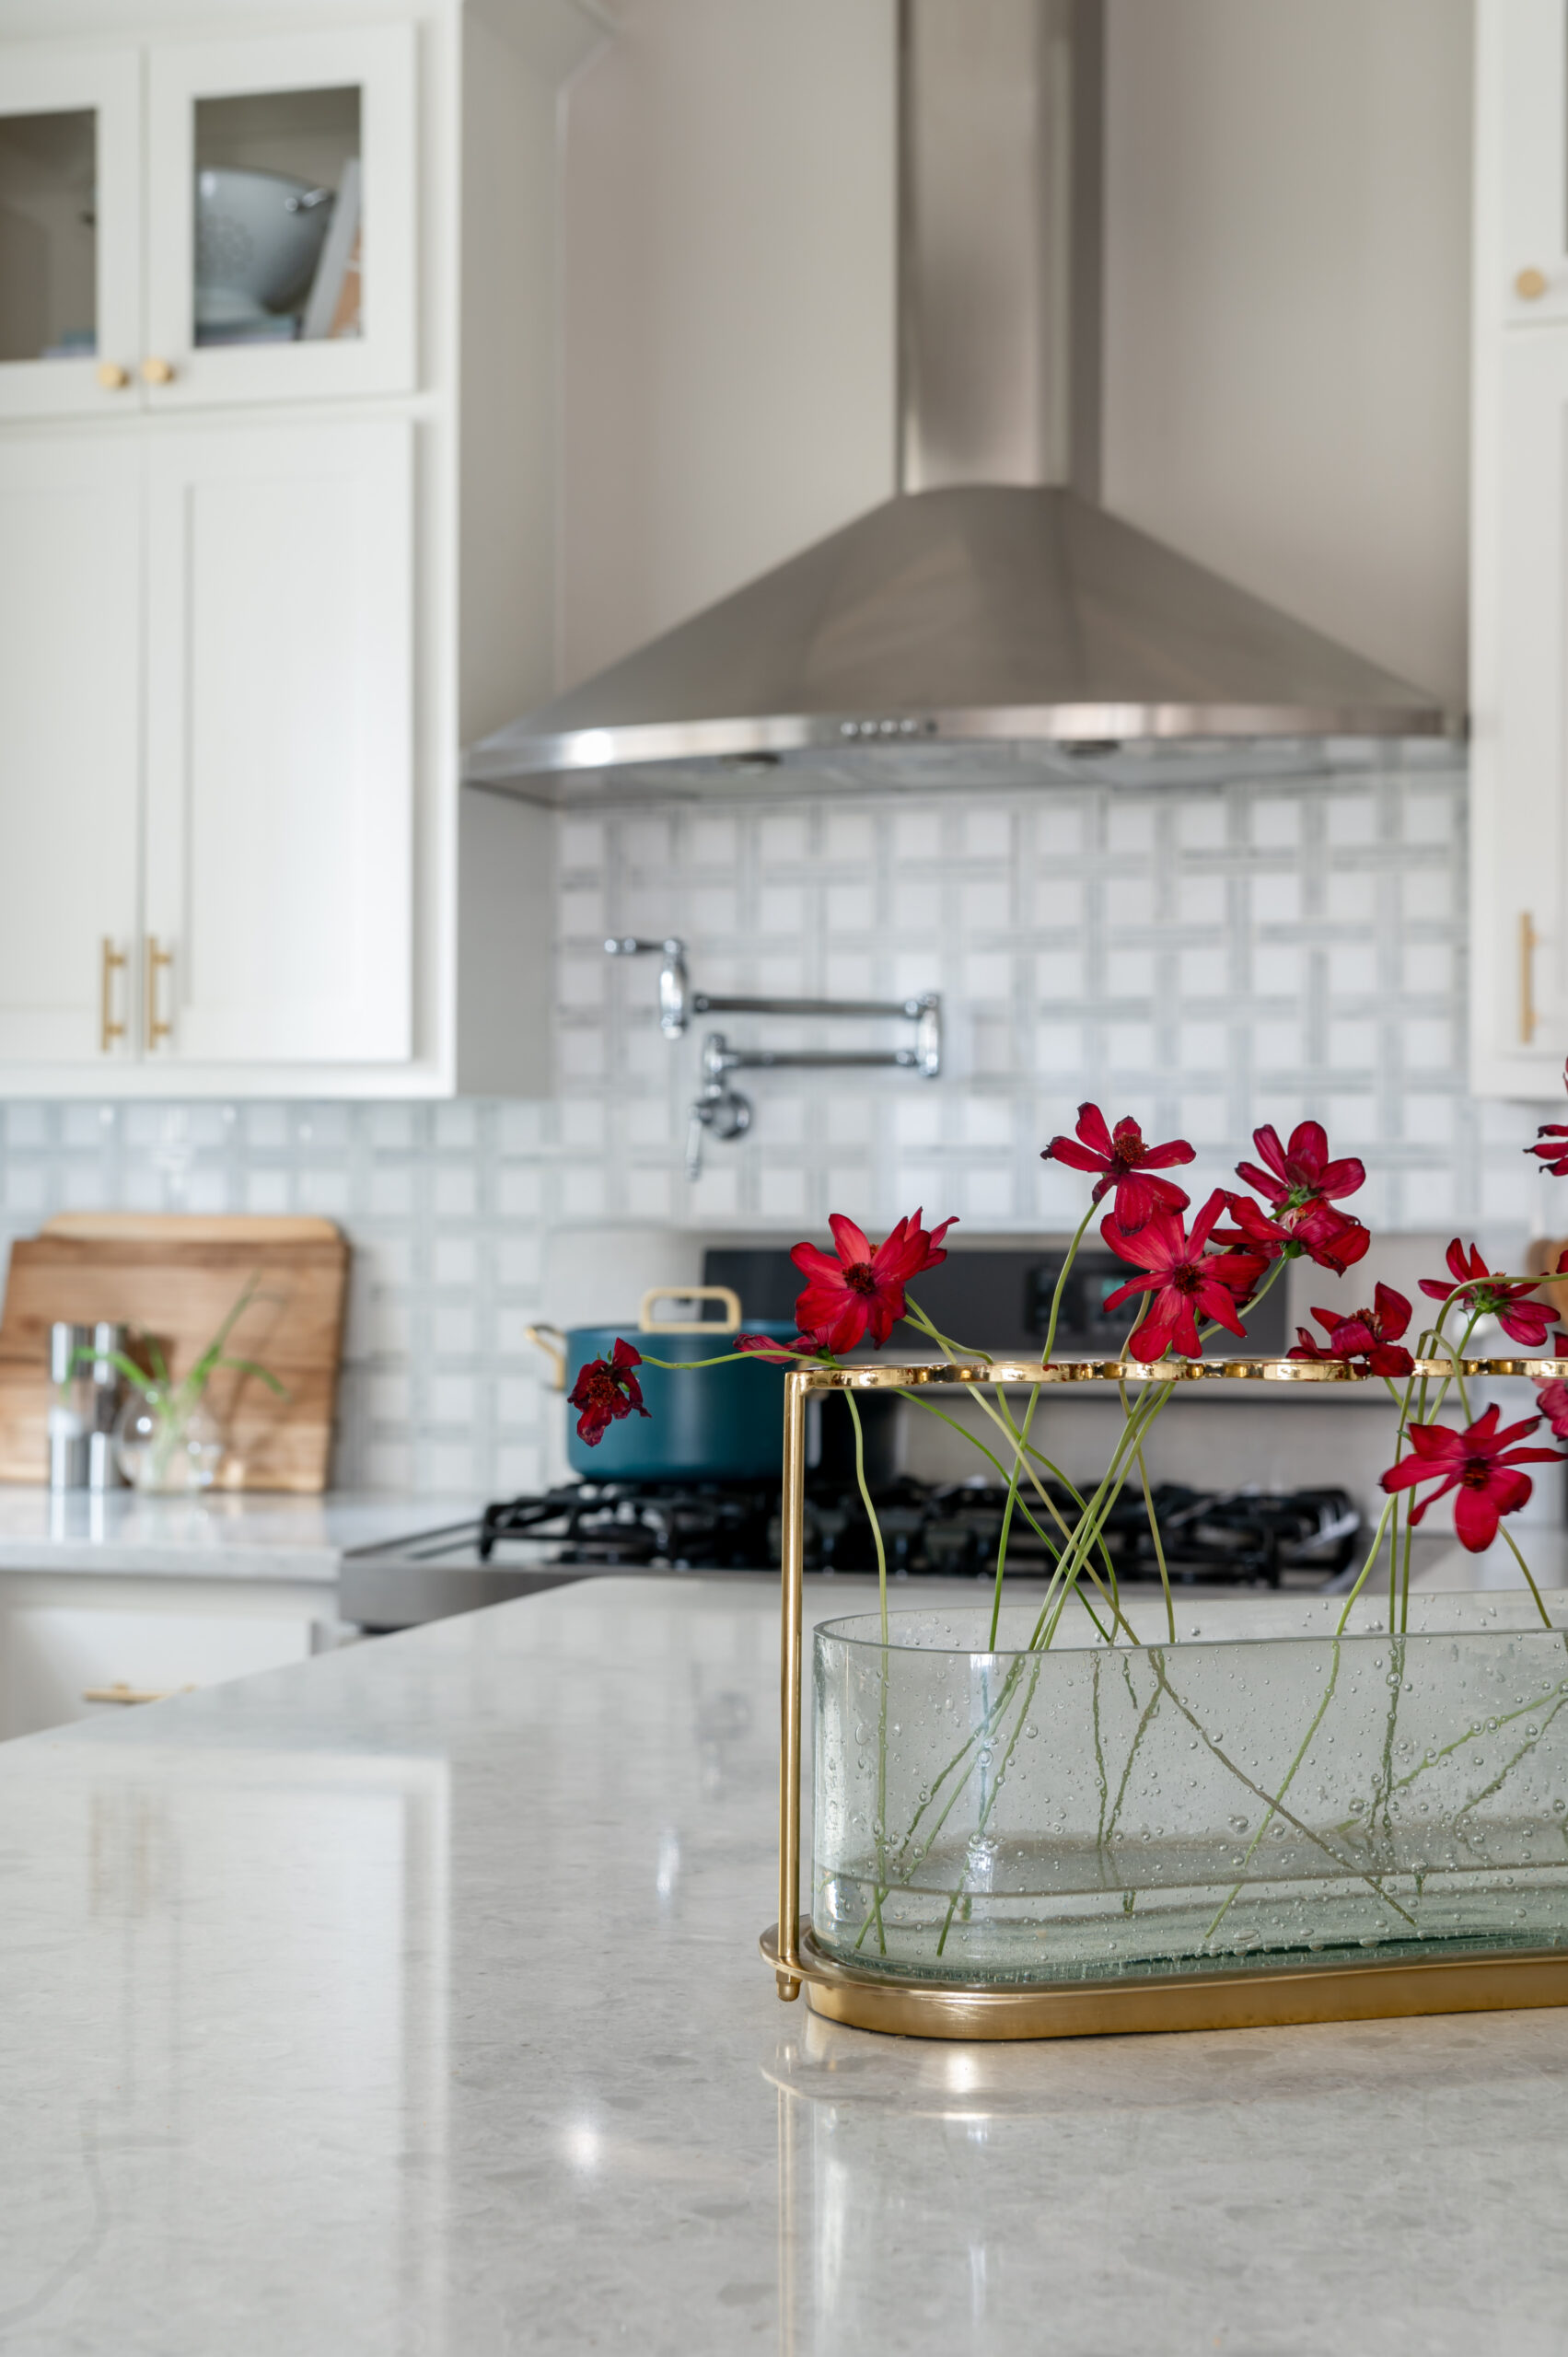 Luxury marble kitchen island and small red flowers